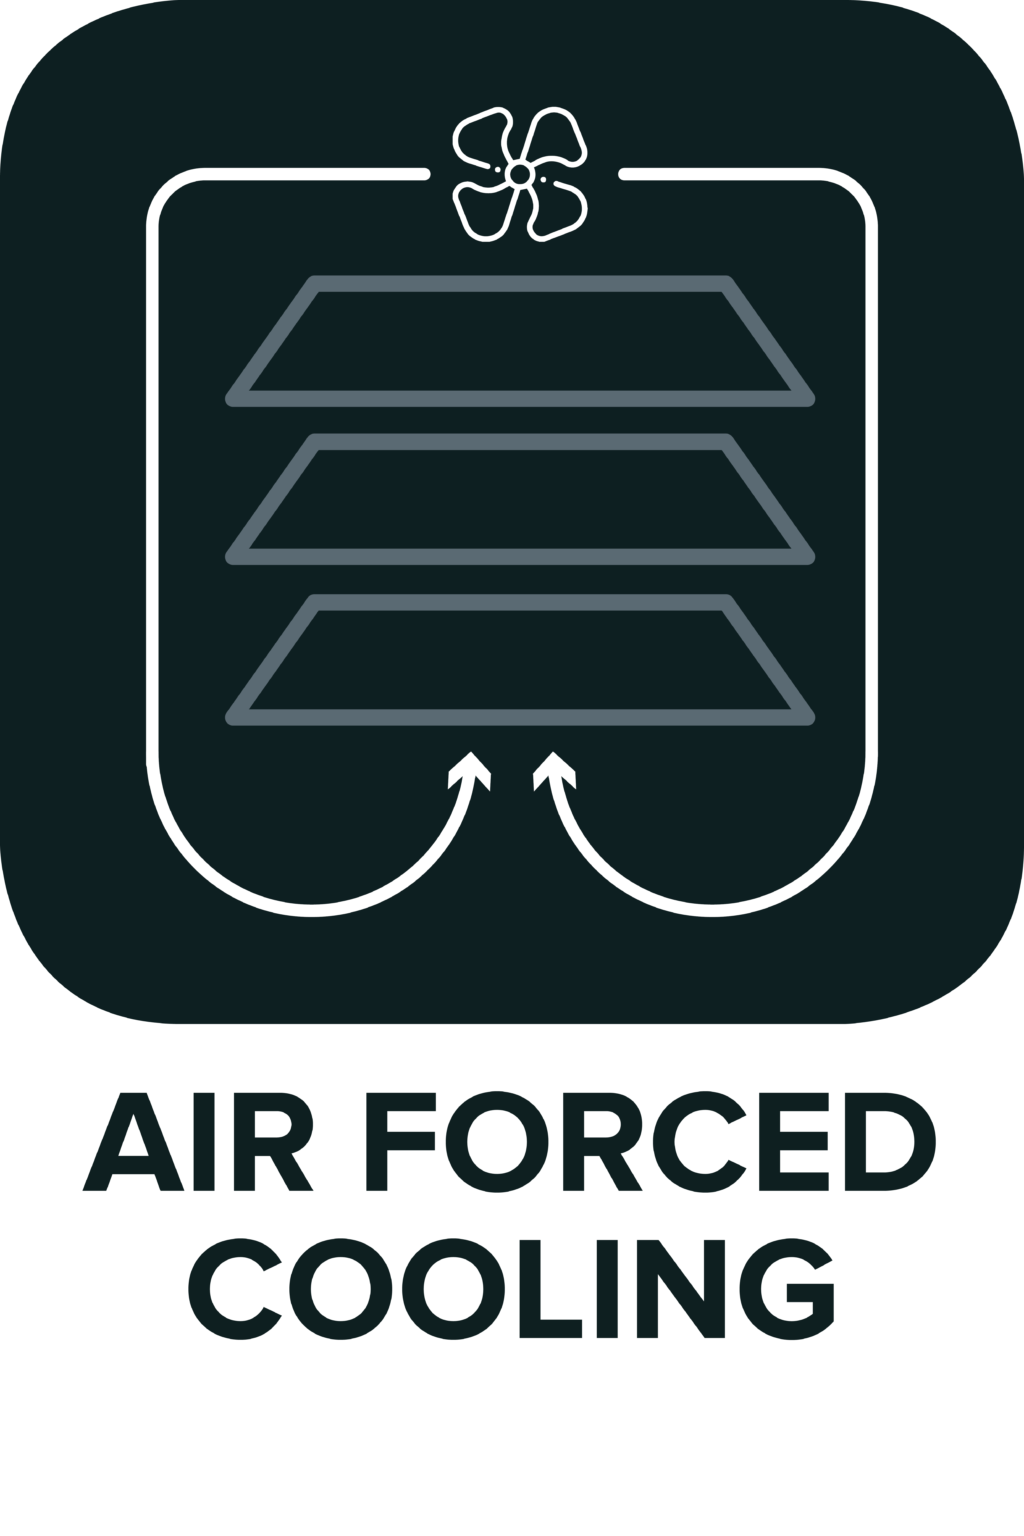 Air forced cooling